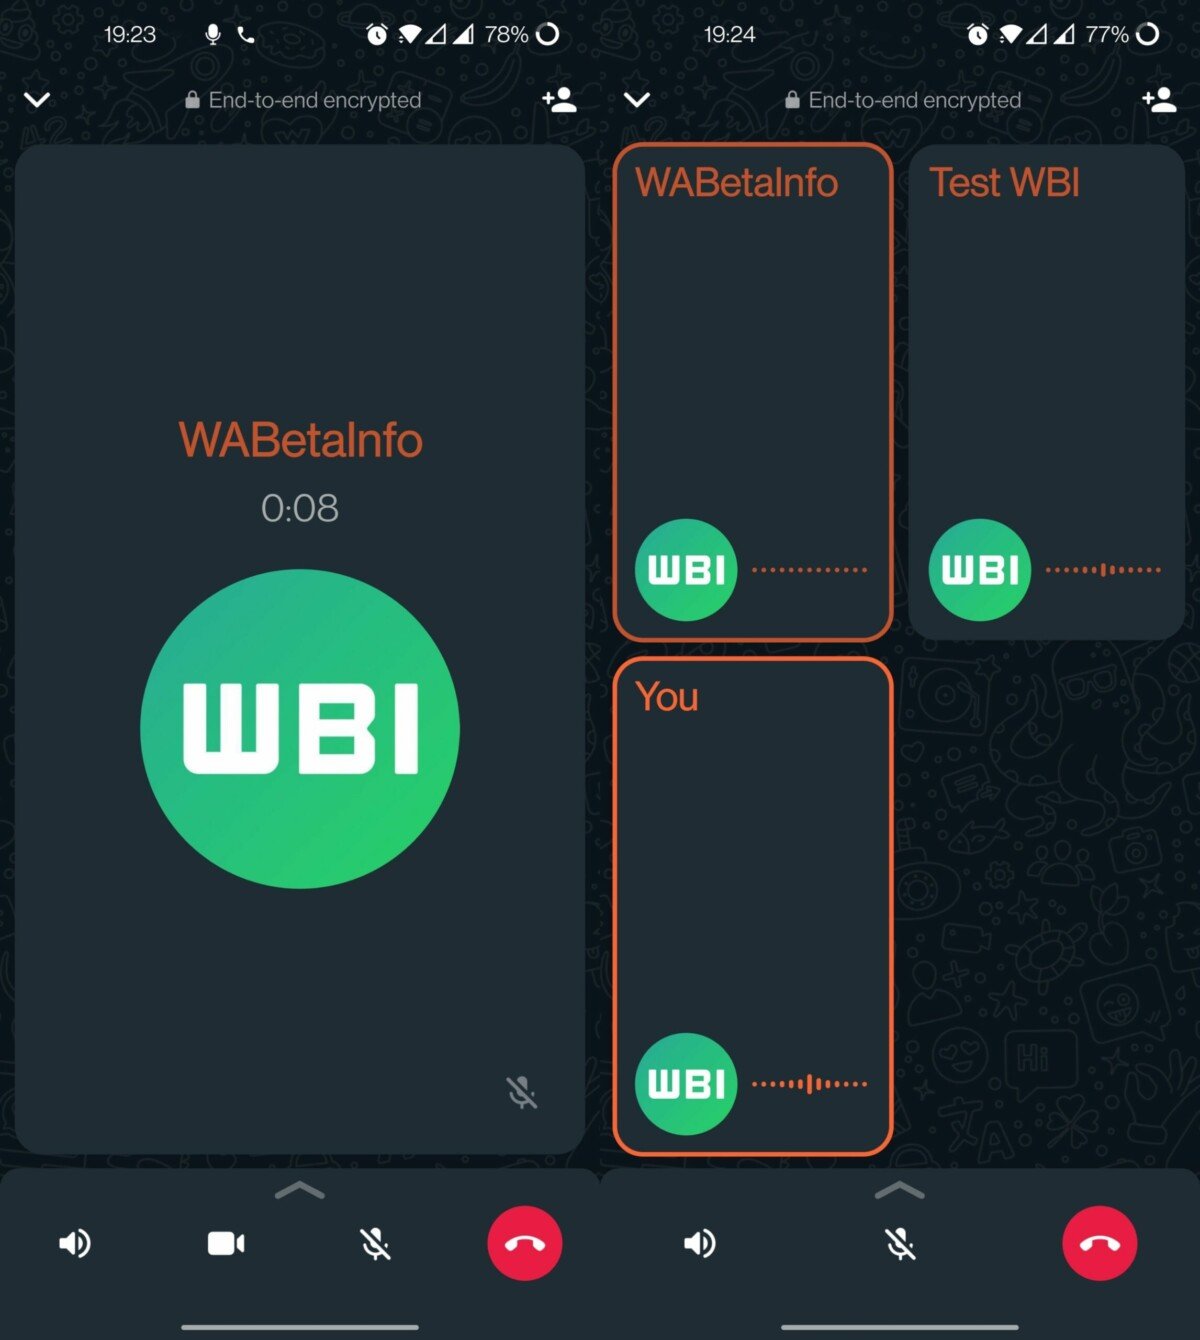 The new interface for voice calls on WhatsApp